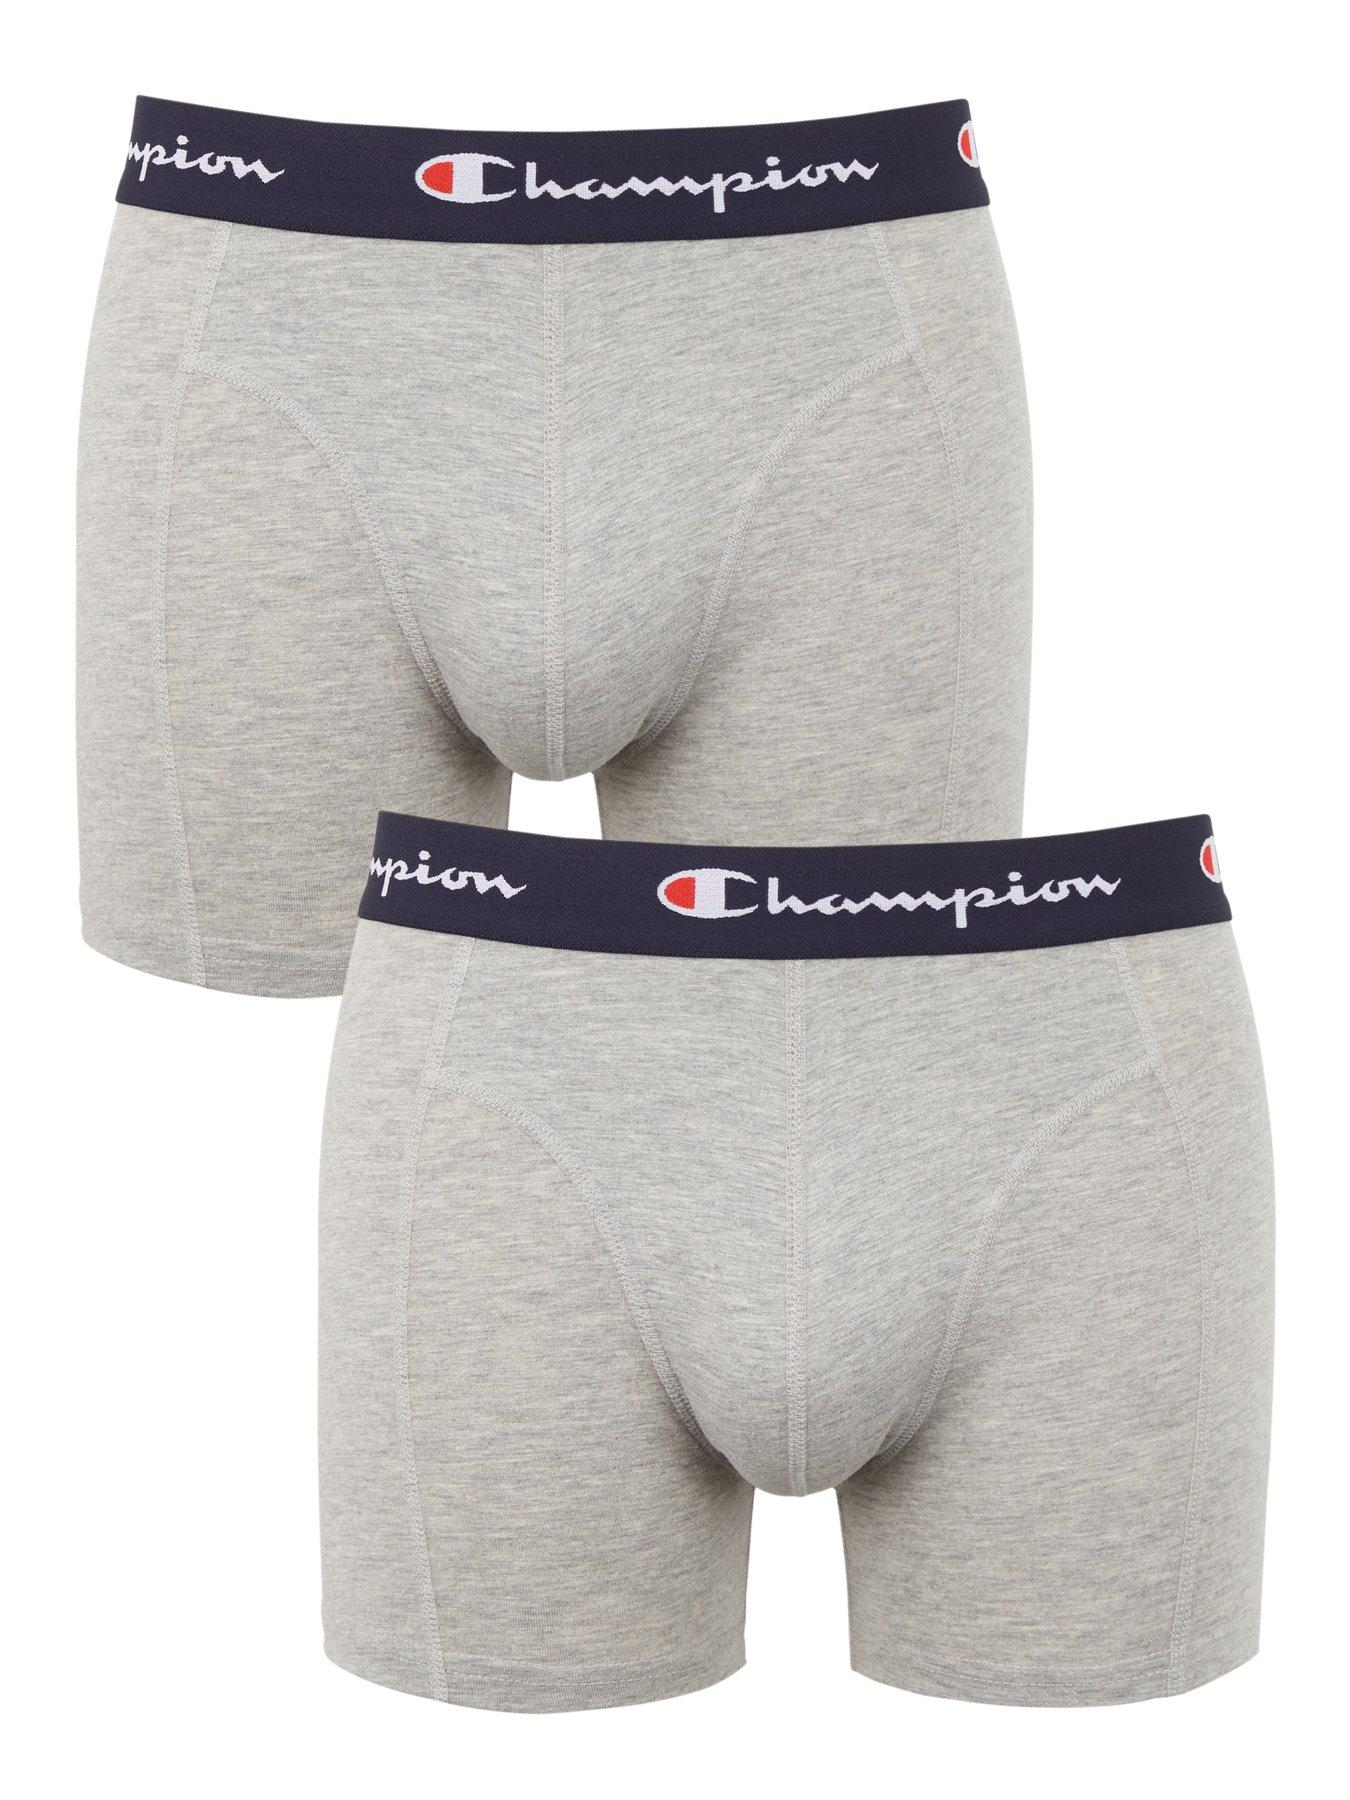 2 pack of Boxers - Grey